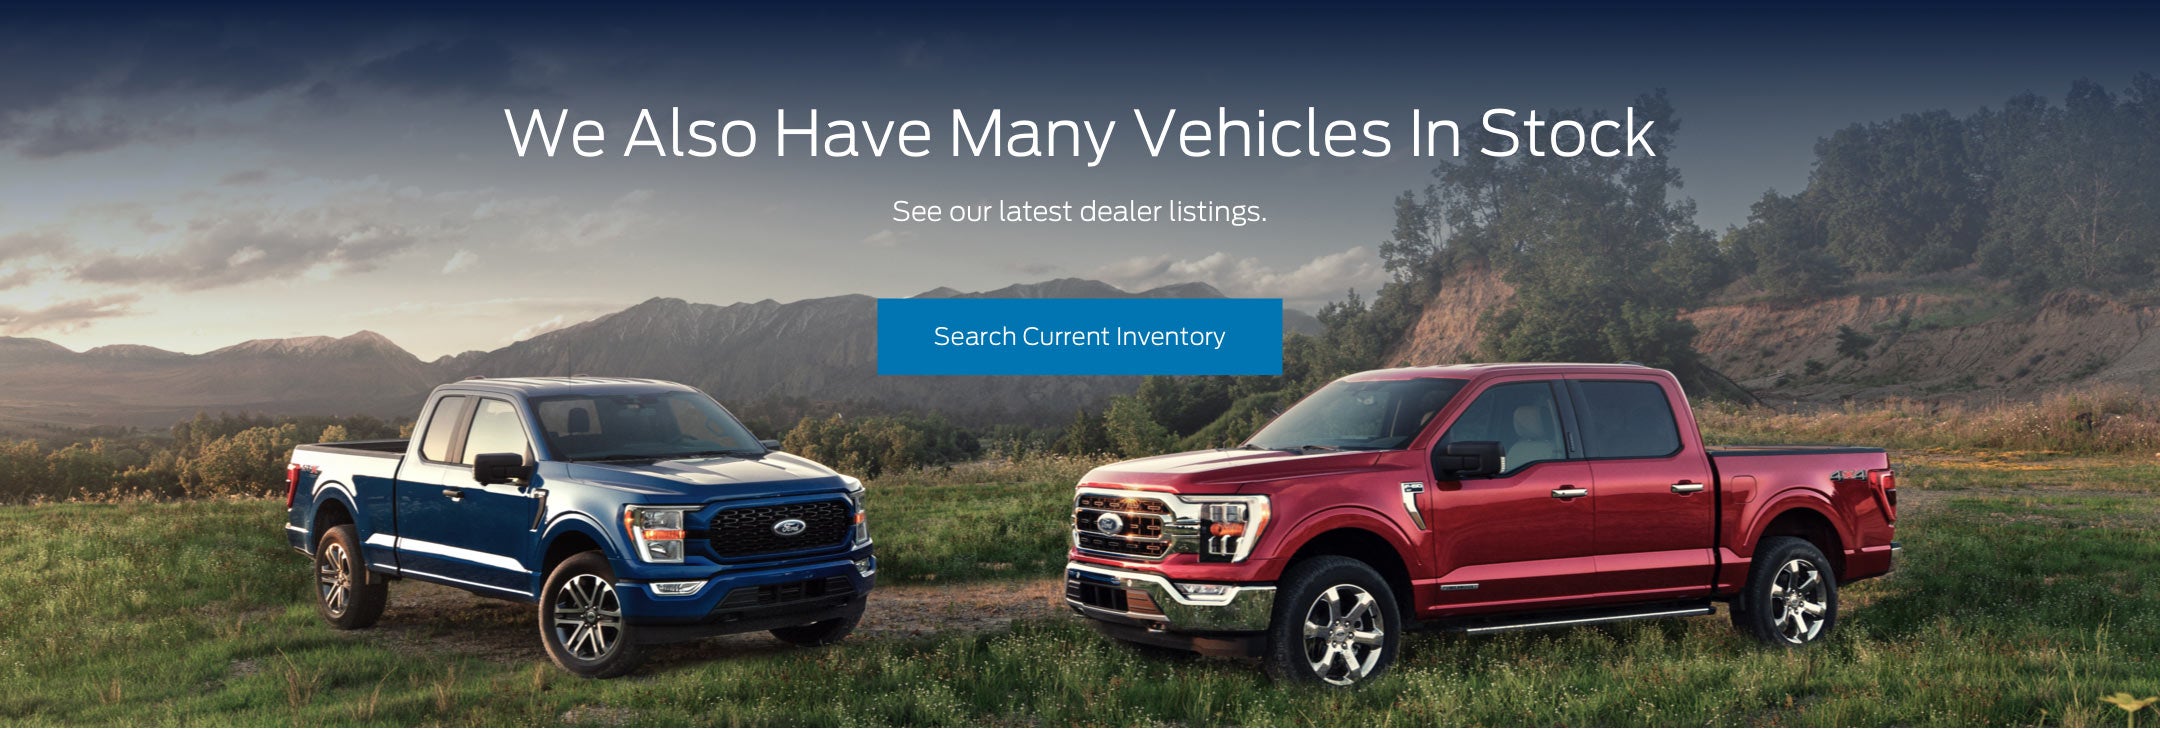 Ford vehicles in stock | Cloninger Ford of Hickory in Hickory NC